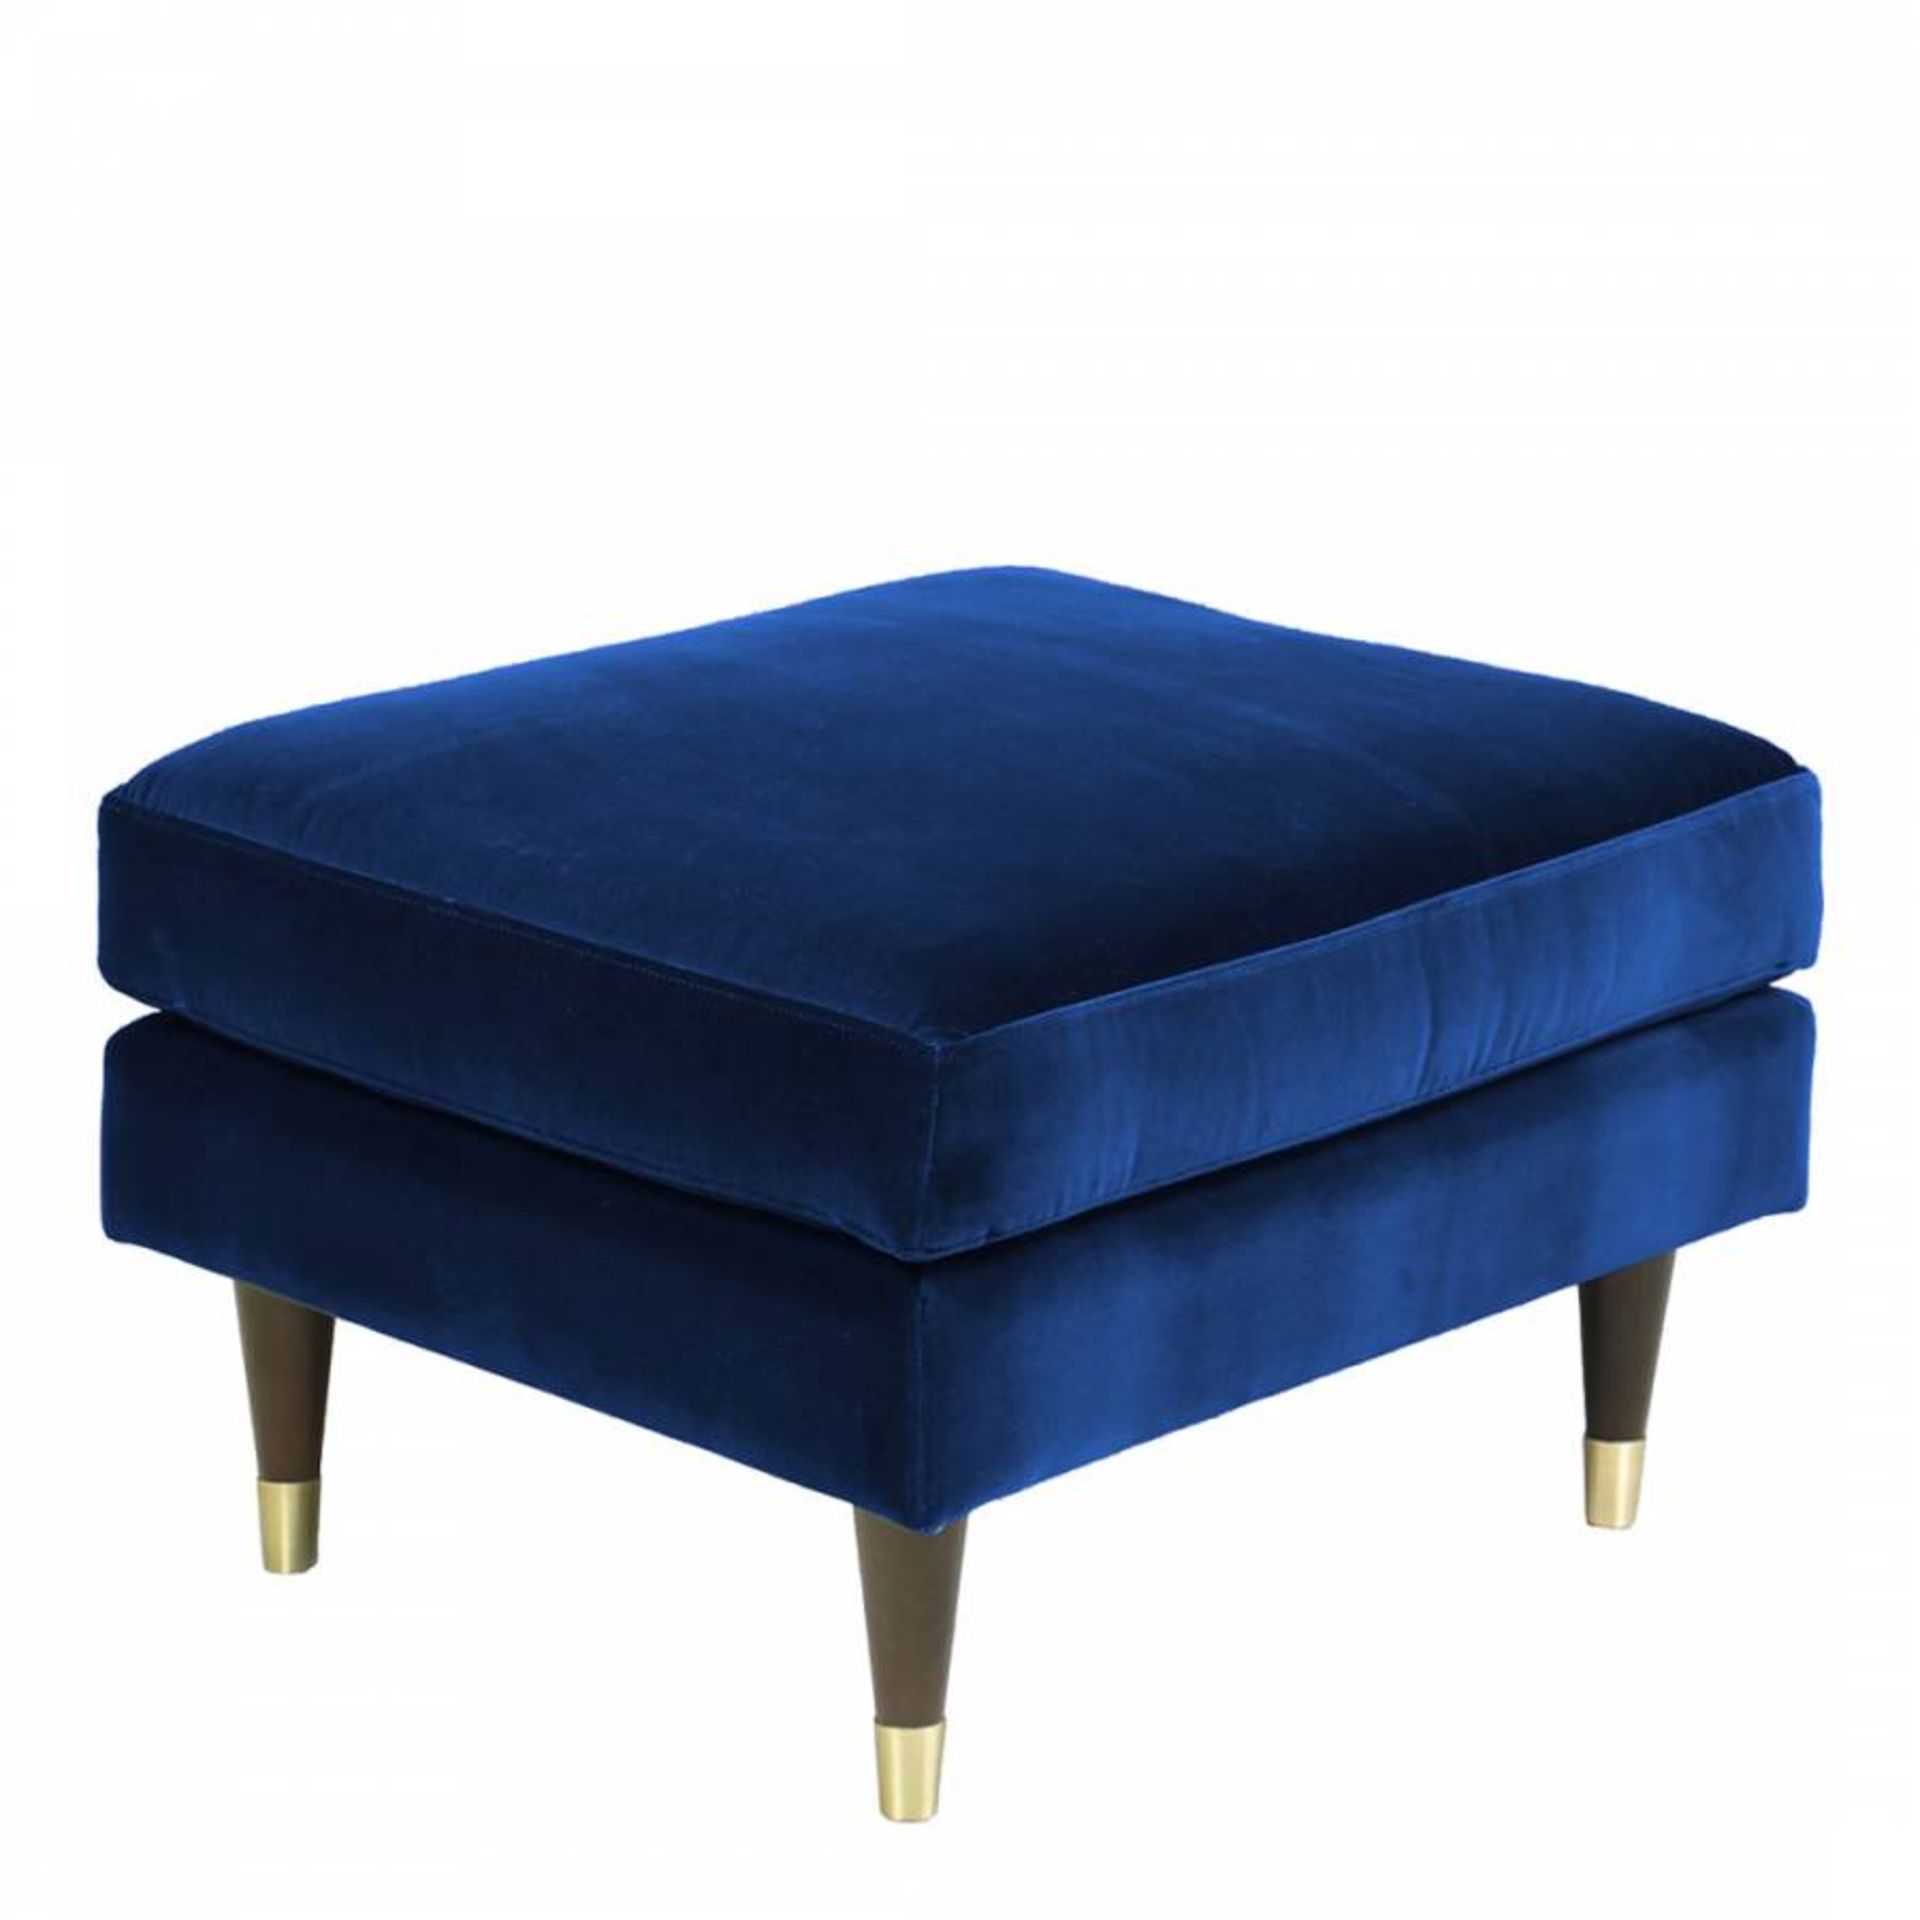 Henry Footstool By Christiane Lemieux Navy Blue Velvet The Footstool With Its Fibre Fill Provides